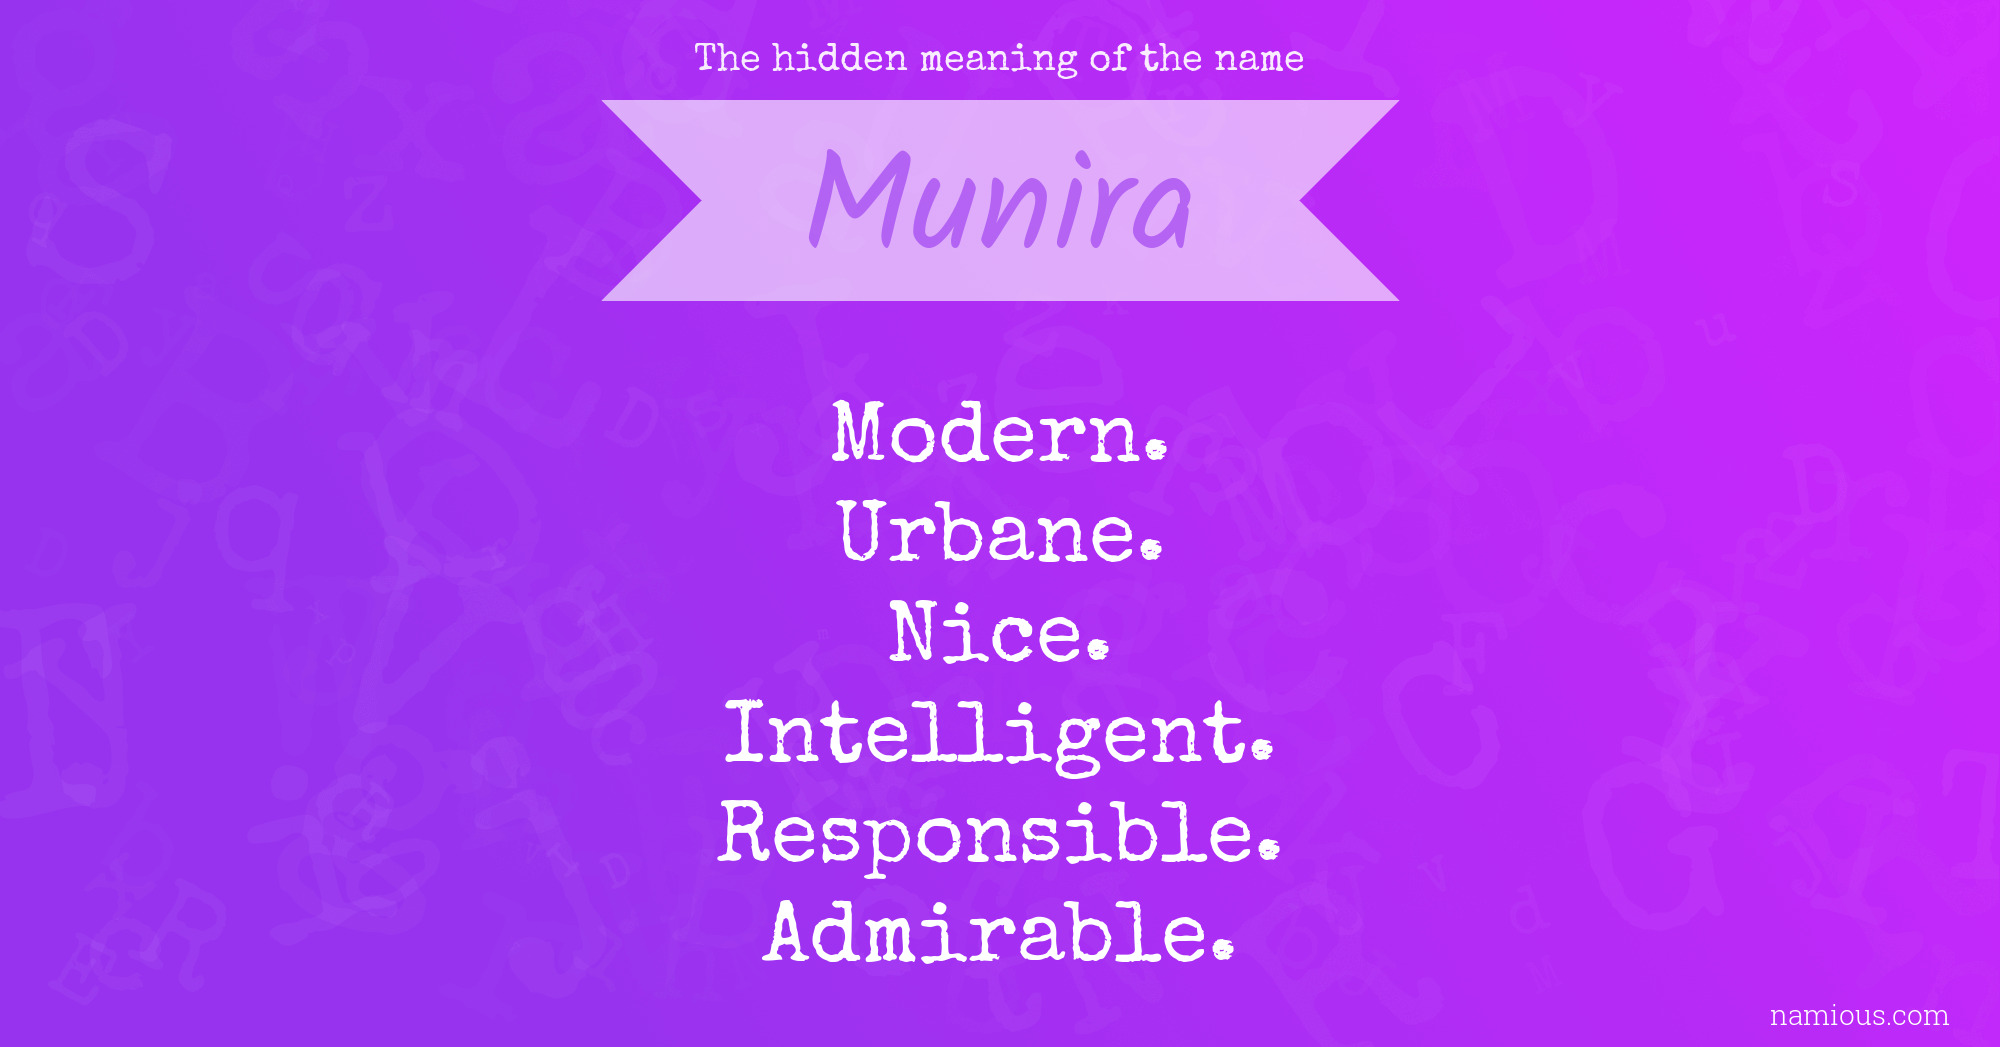 The hidden meaning of the name Munira